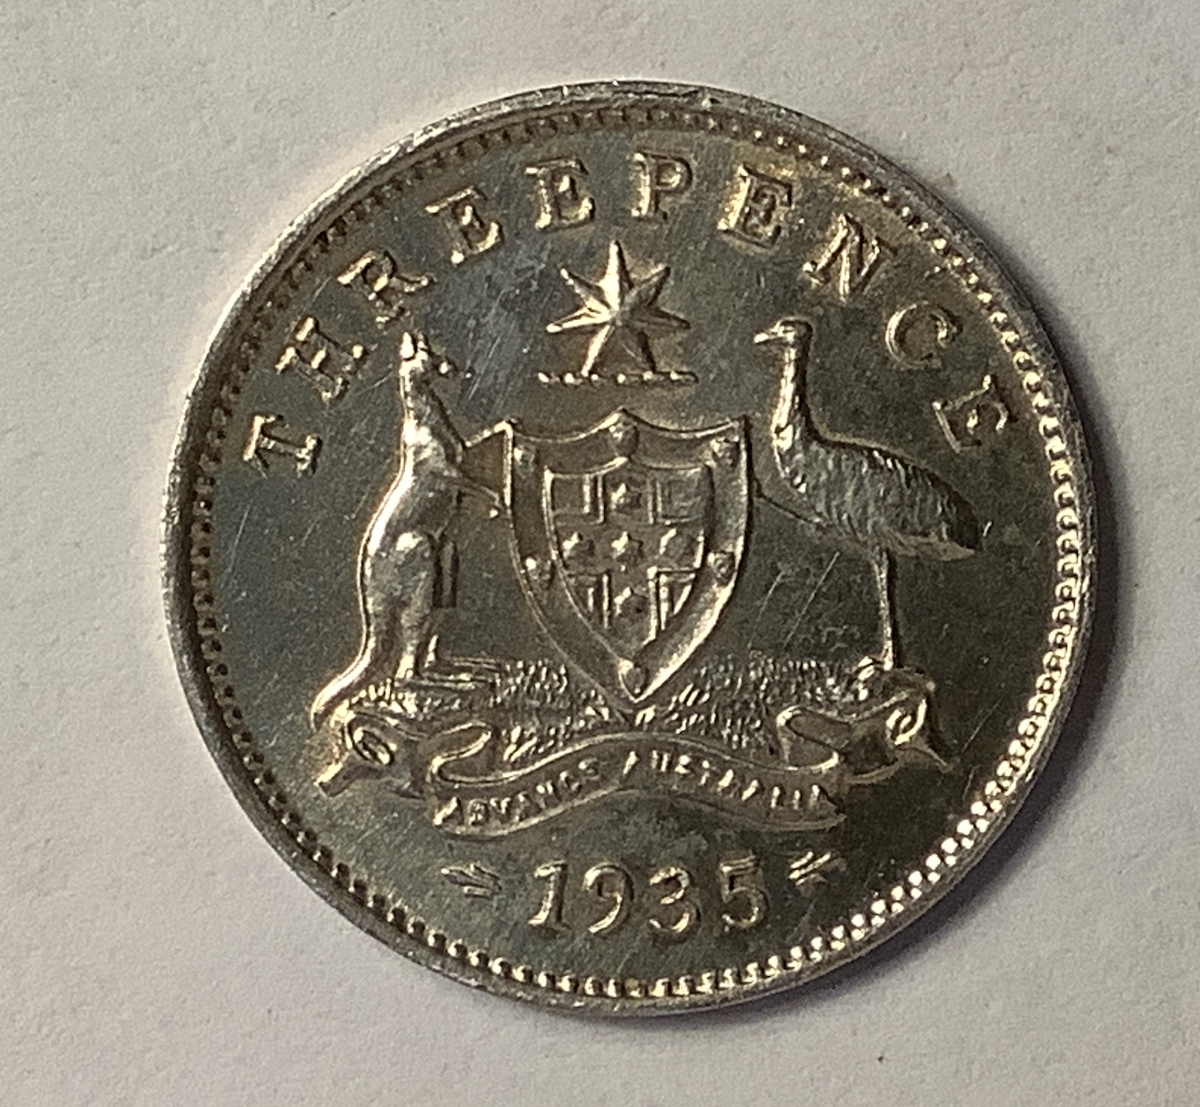 1935 Threepence Uncirculated (Cleaned)